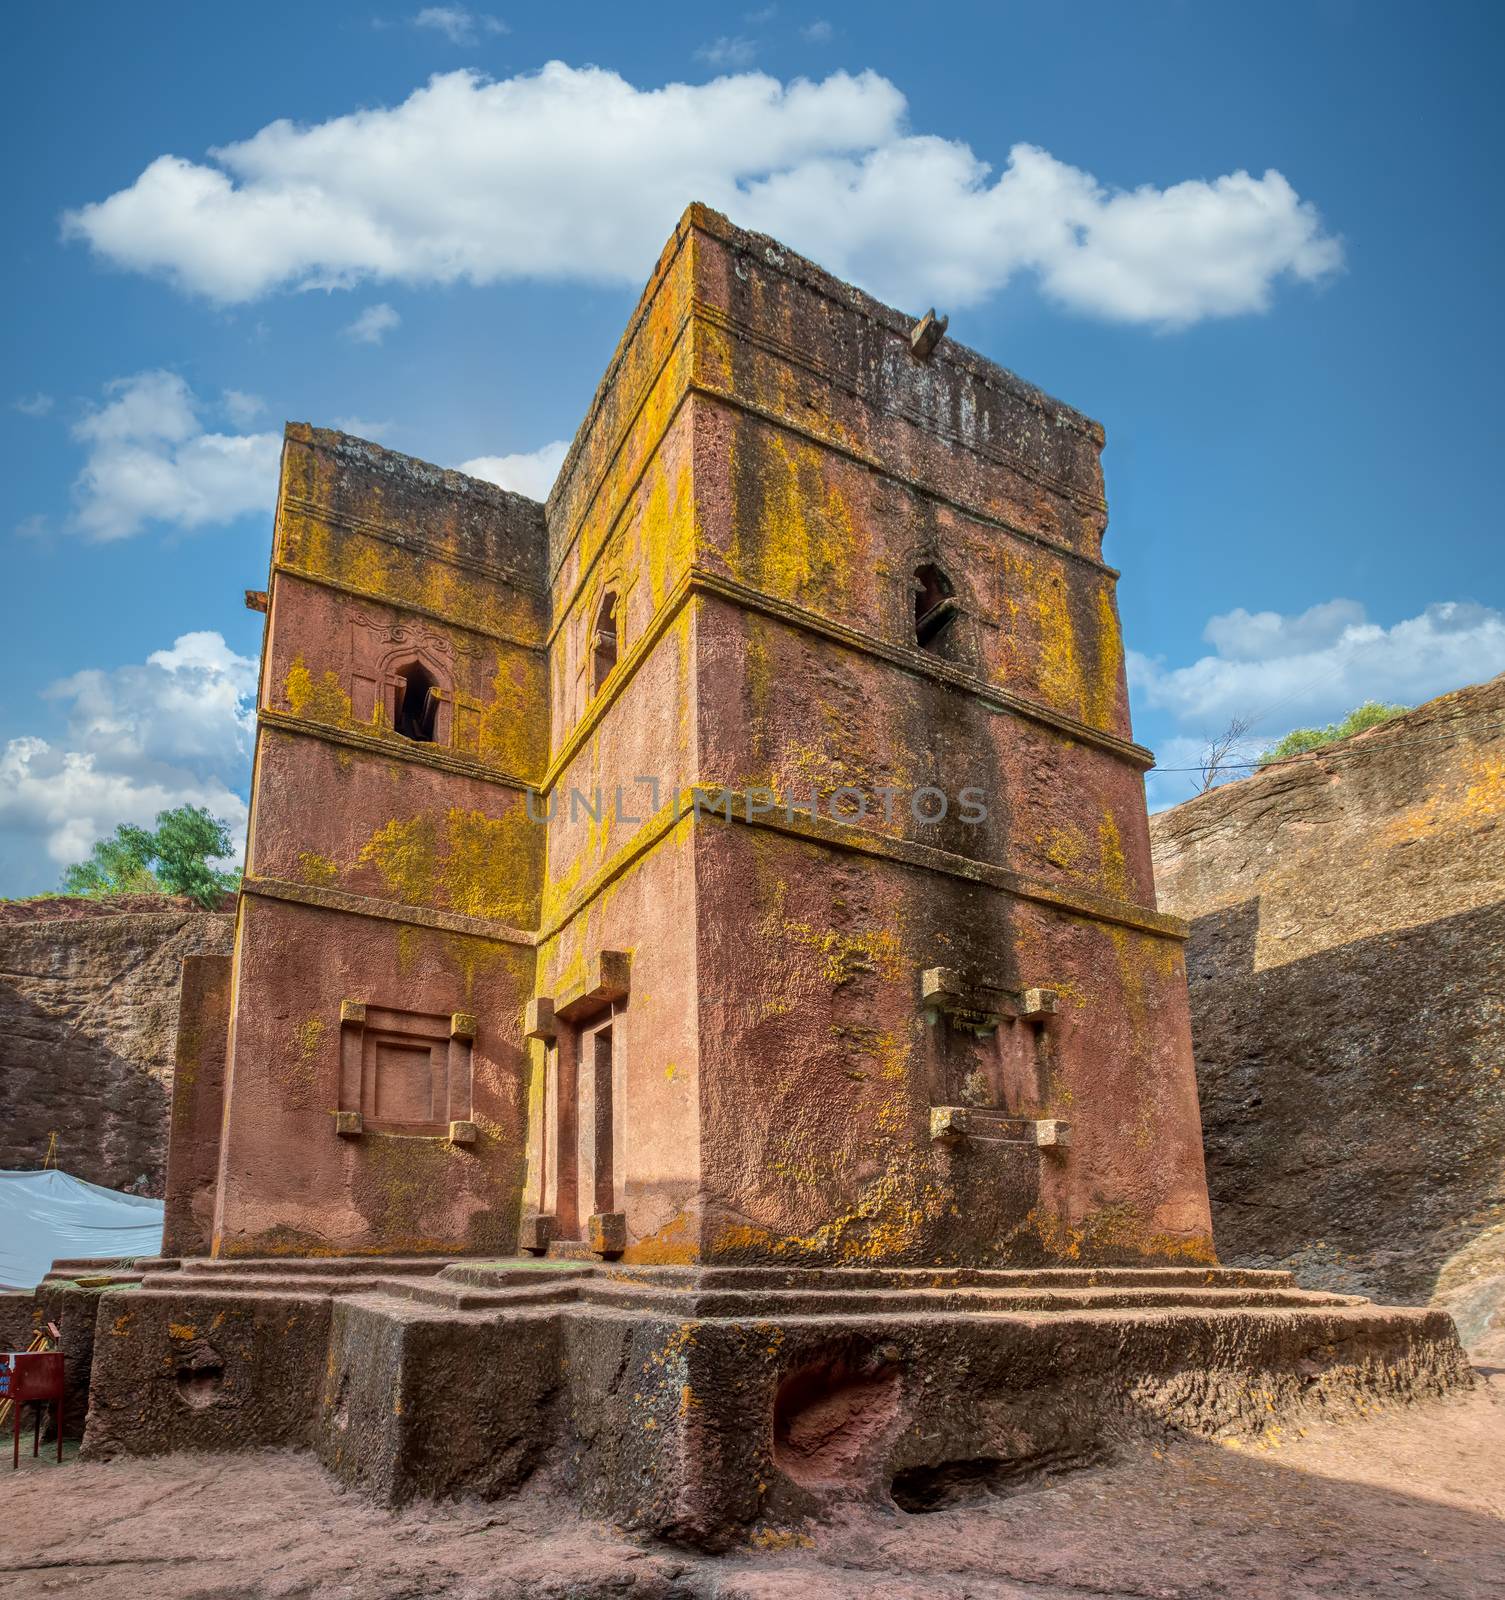 Rock-hewn Church of Saint George in the shape of a cross, Bete Giyorgis, monolithic church in Lalibela, UNESCO World Heritage Site Rock-Hewn Churches. The Church was carved downwards from one monolitic stone